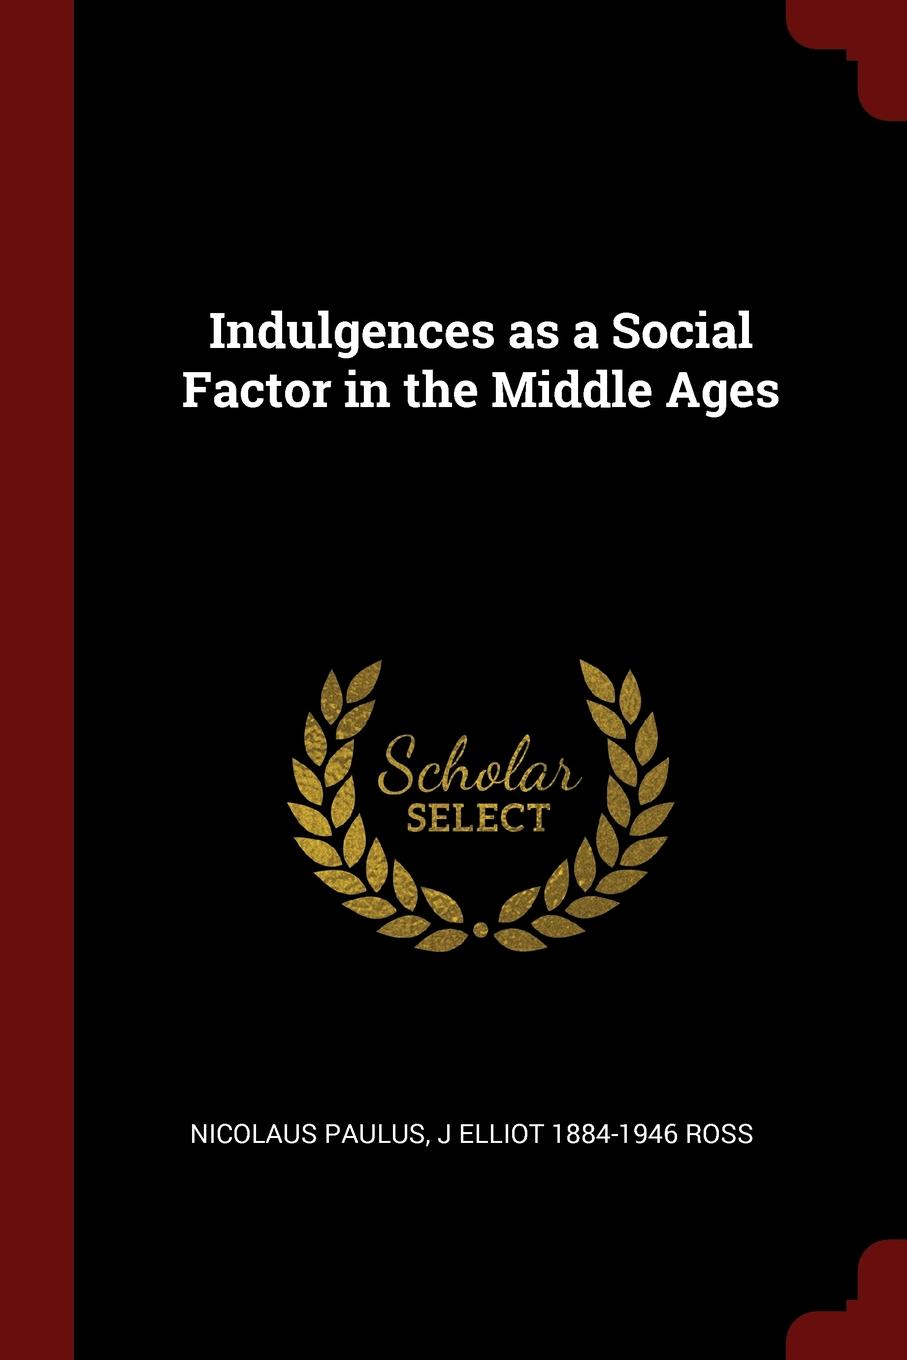 Indulgences as a Social Factor in the Middle Ages